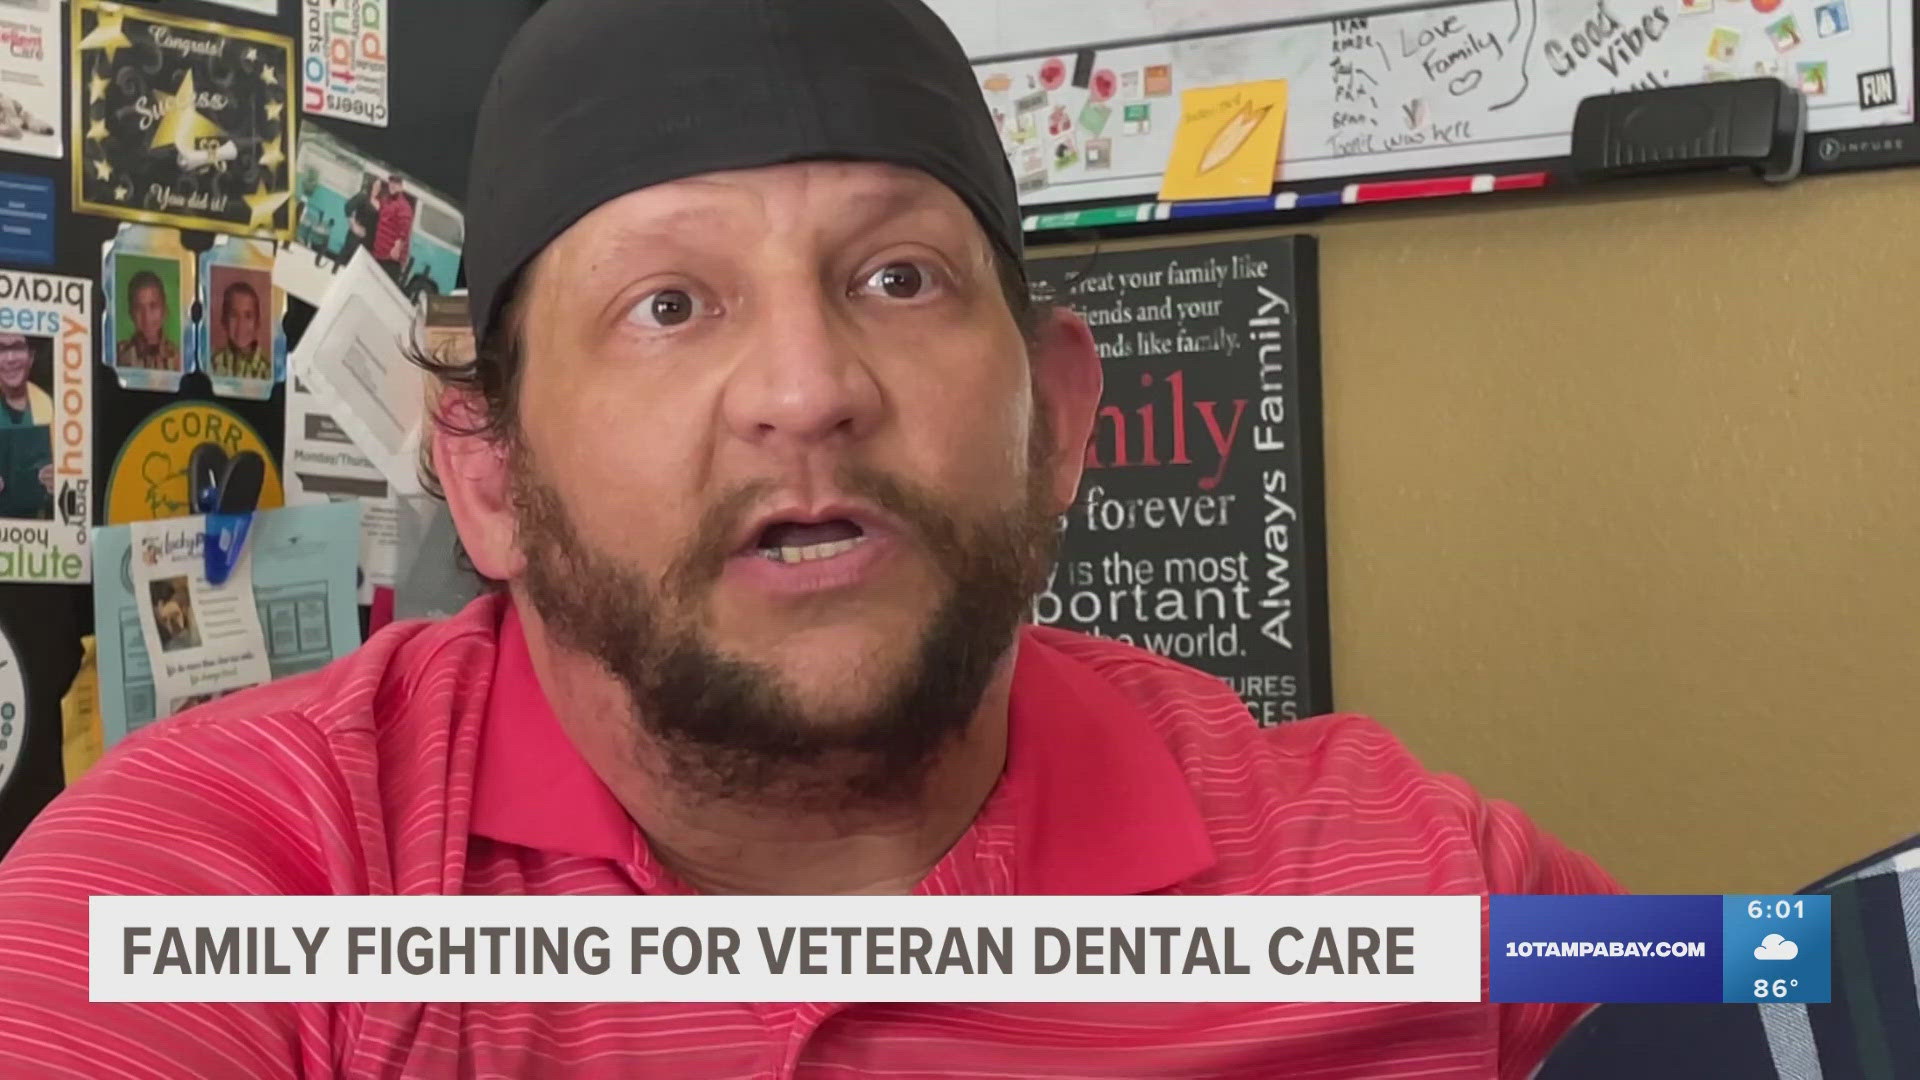 Of the more than 9 million veterans who are eligible for medical care from the VA, 85% are not eligible for dental care.